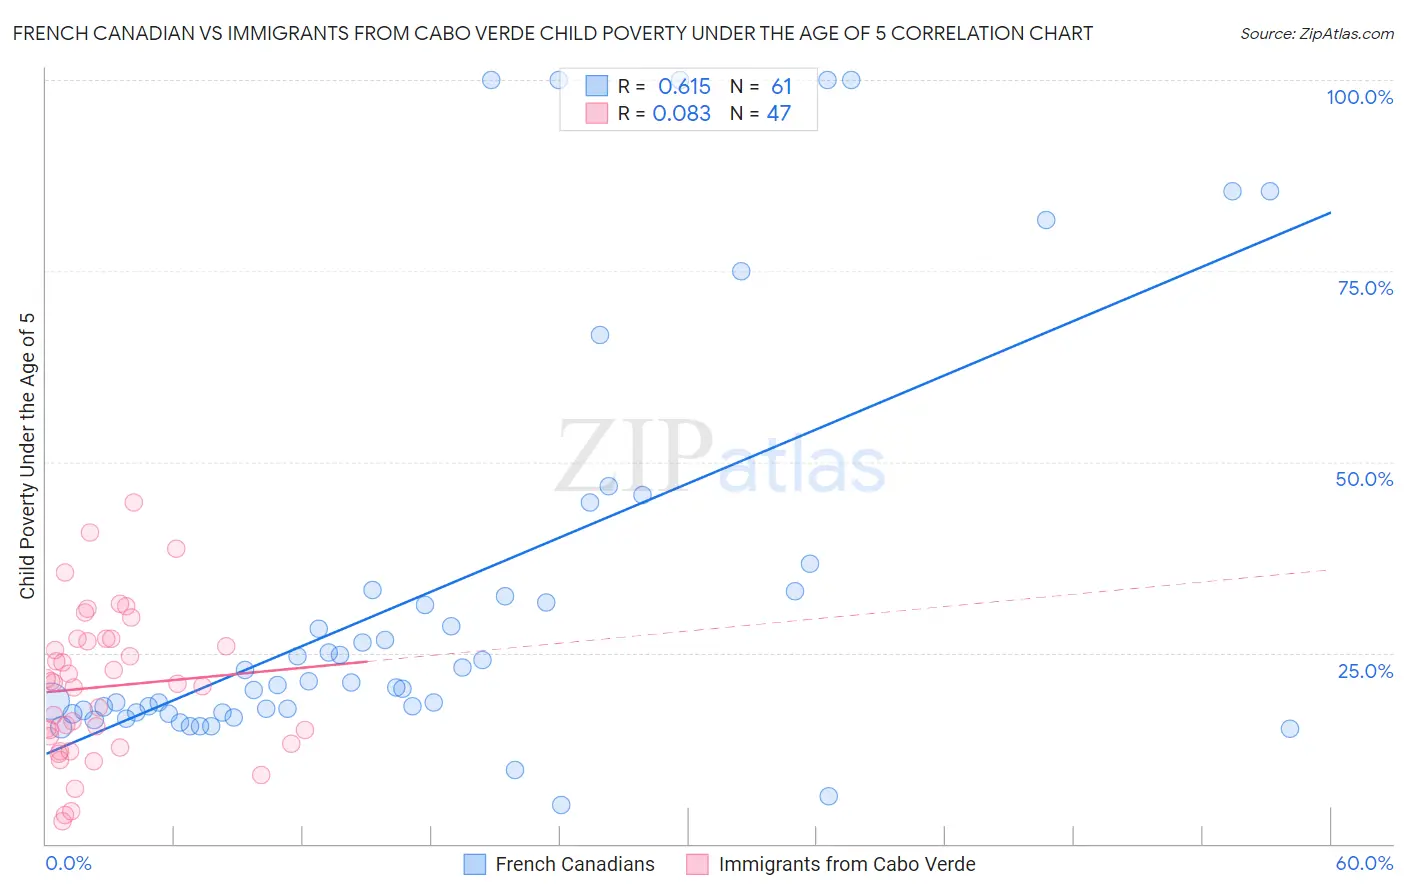 French Canadian vs Immigrants from Cabo Verde Child Poverty Under the Age of 5